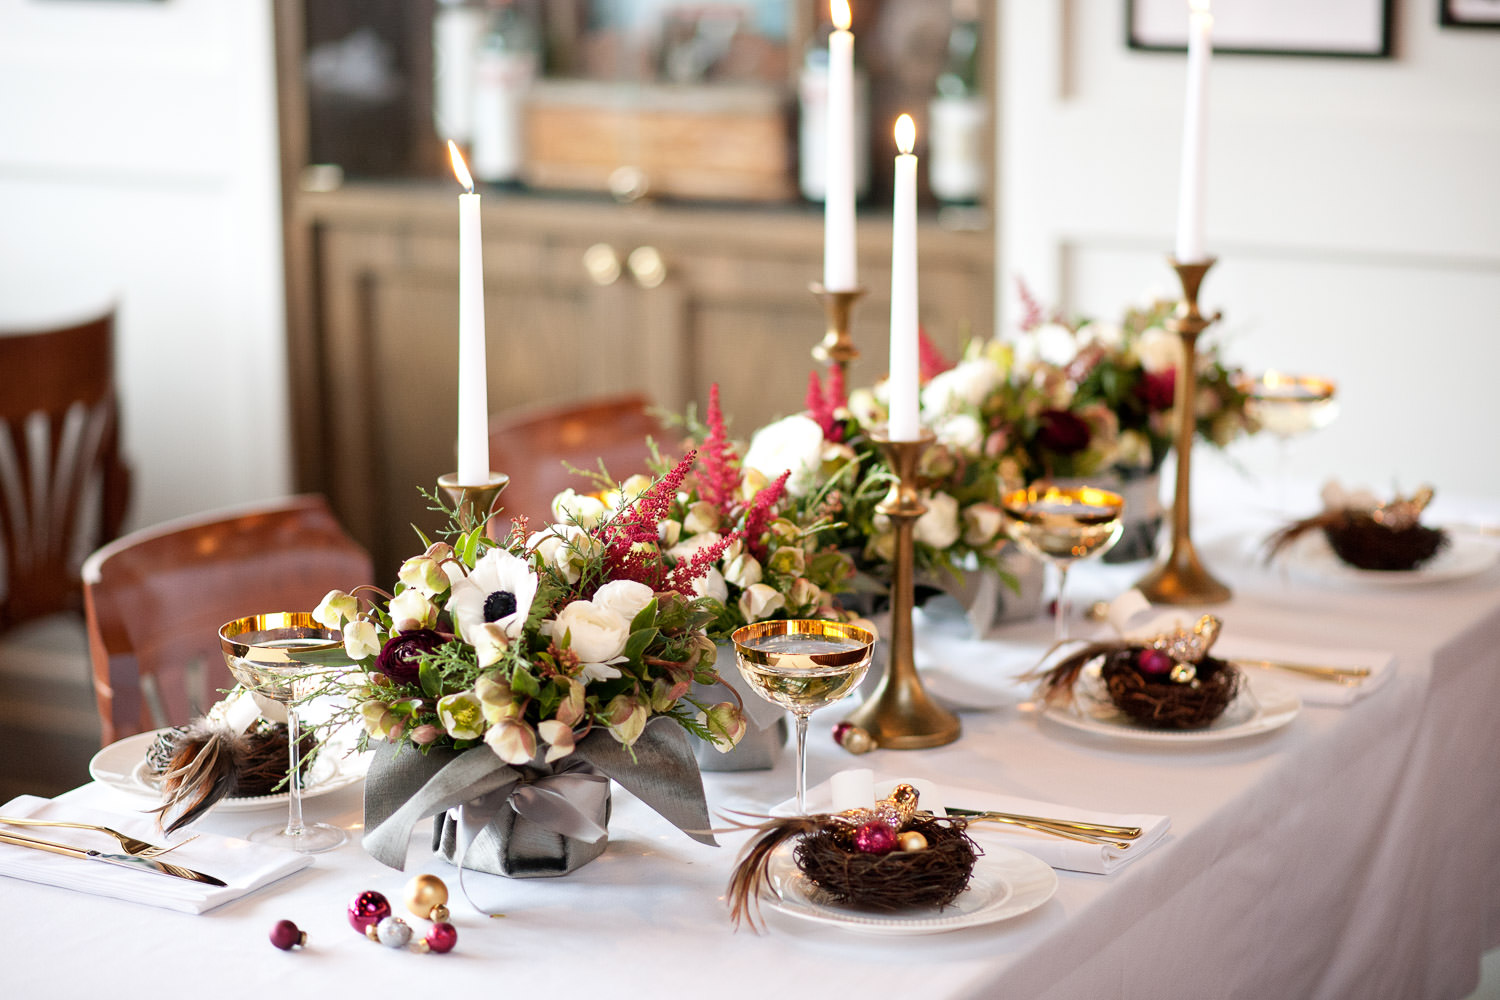 Holiday table with flowers, candles and gold champagne coupes captured by Tara Whittaker Photography